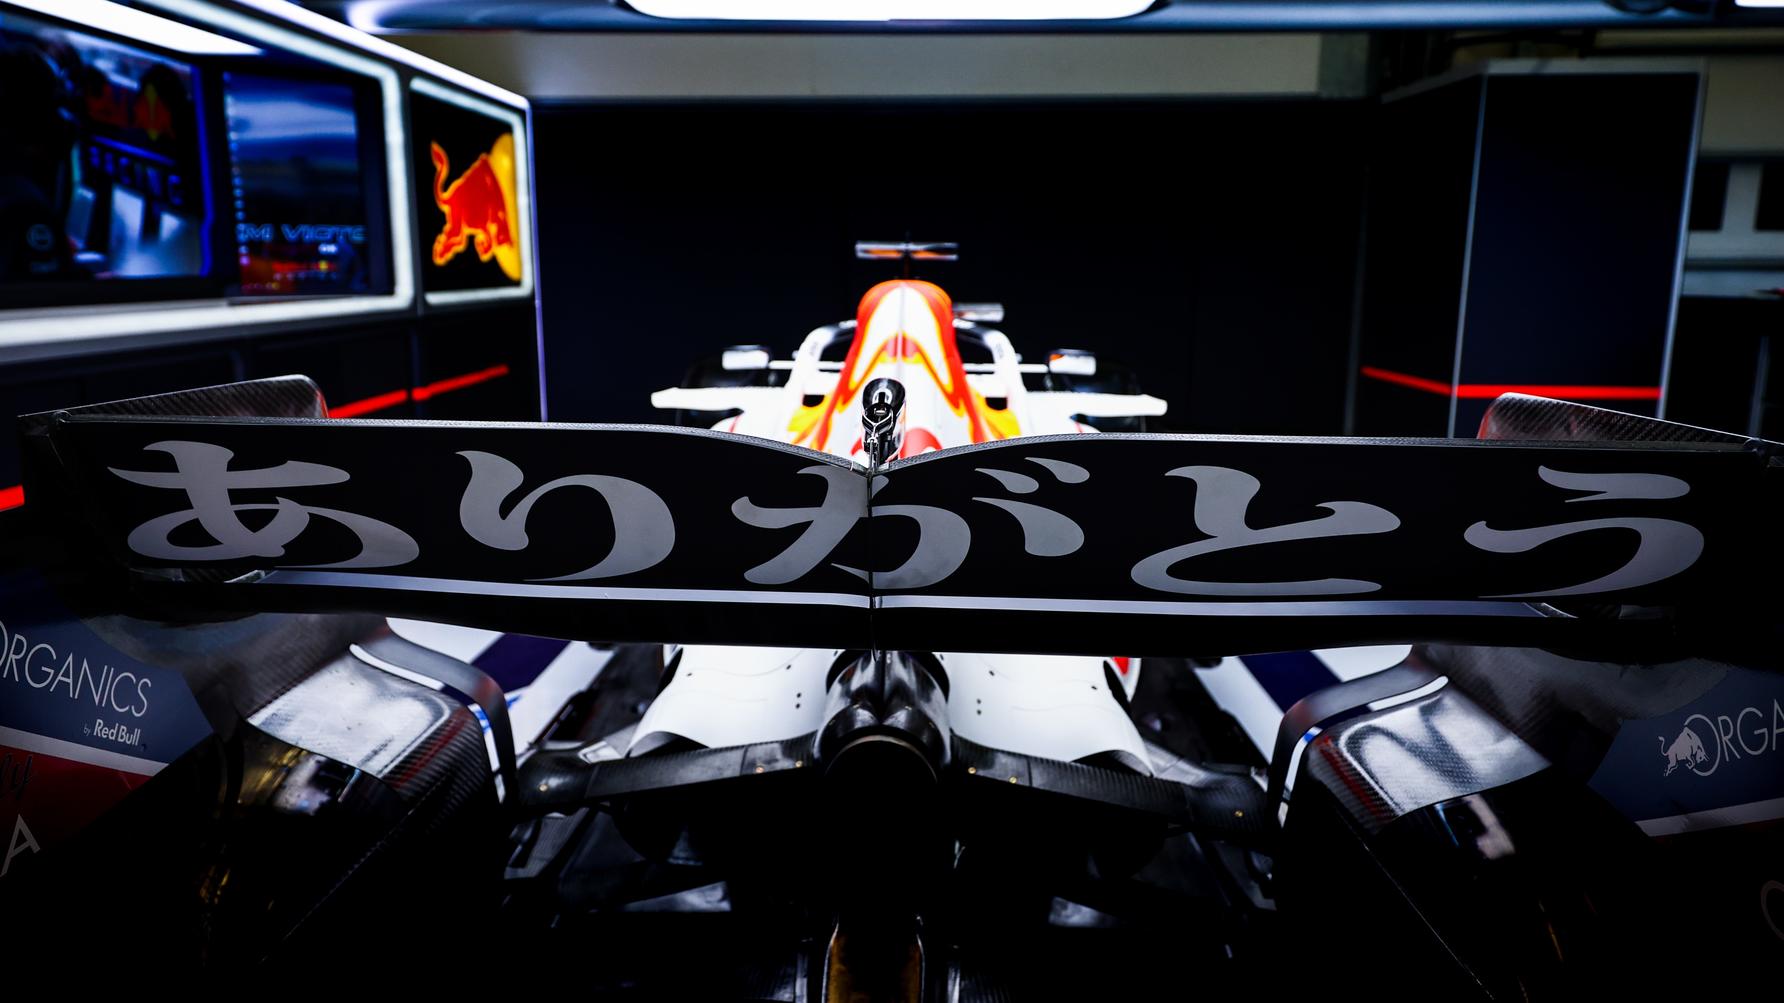 Wings of Red Bull's Formula One car